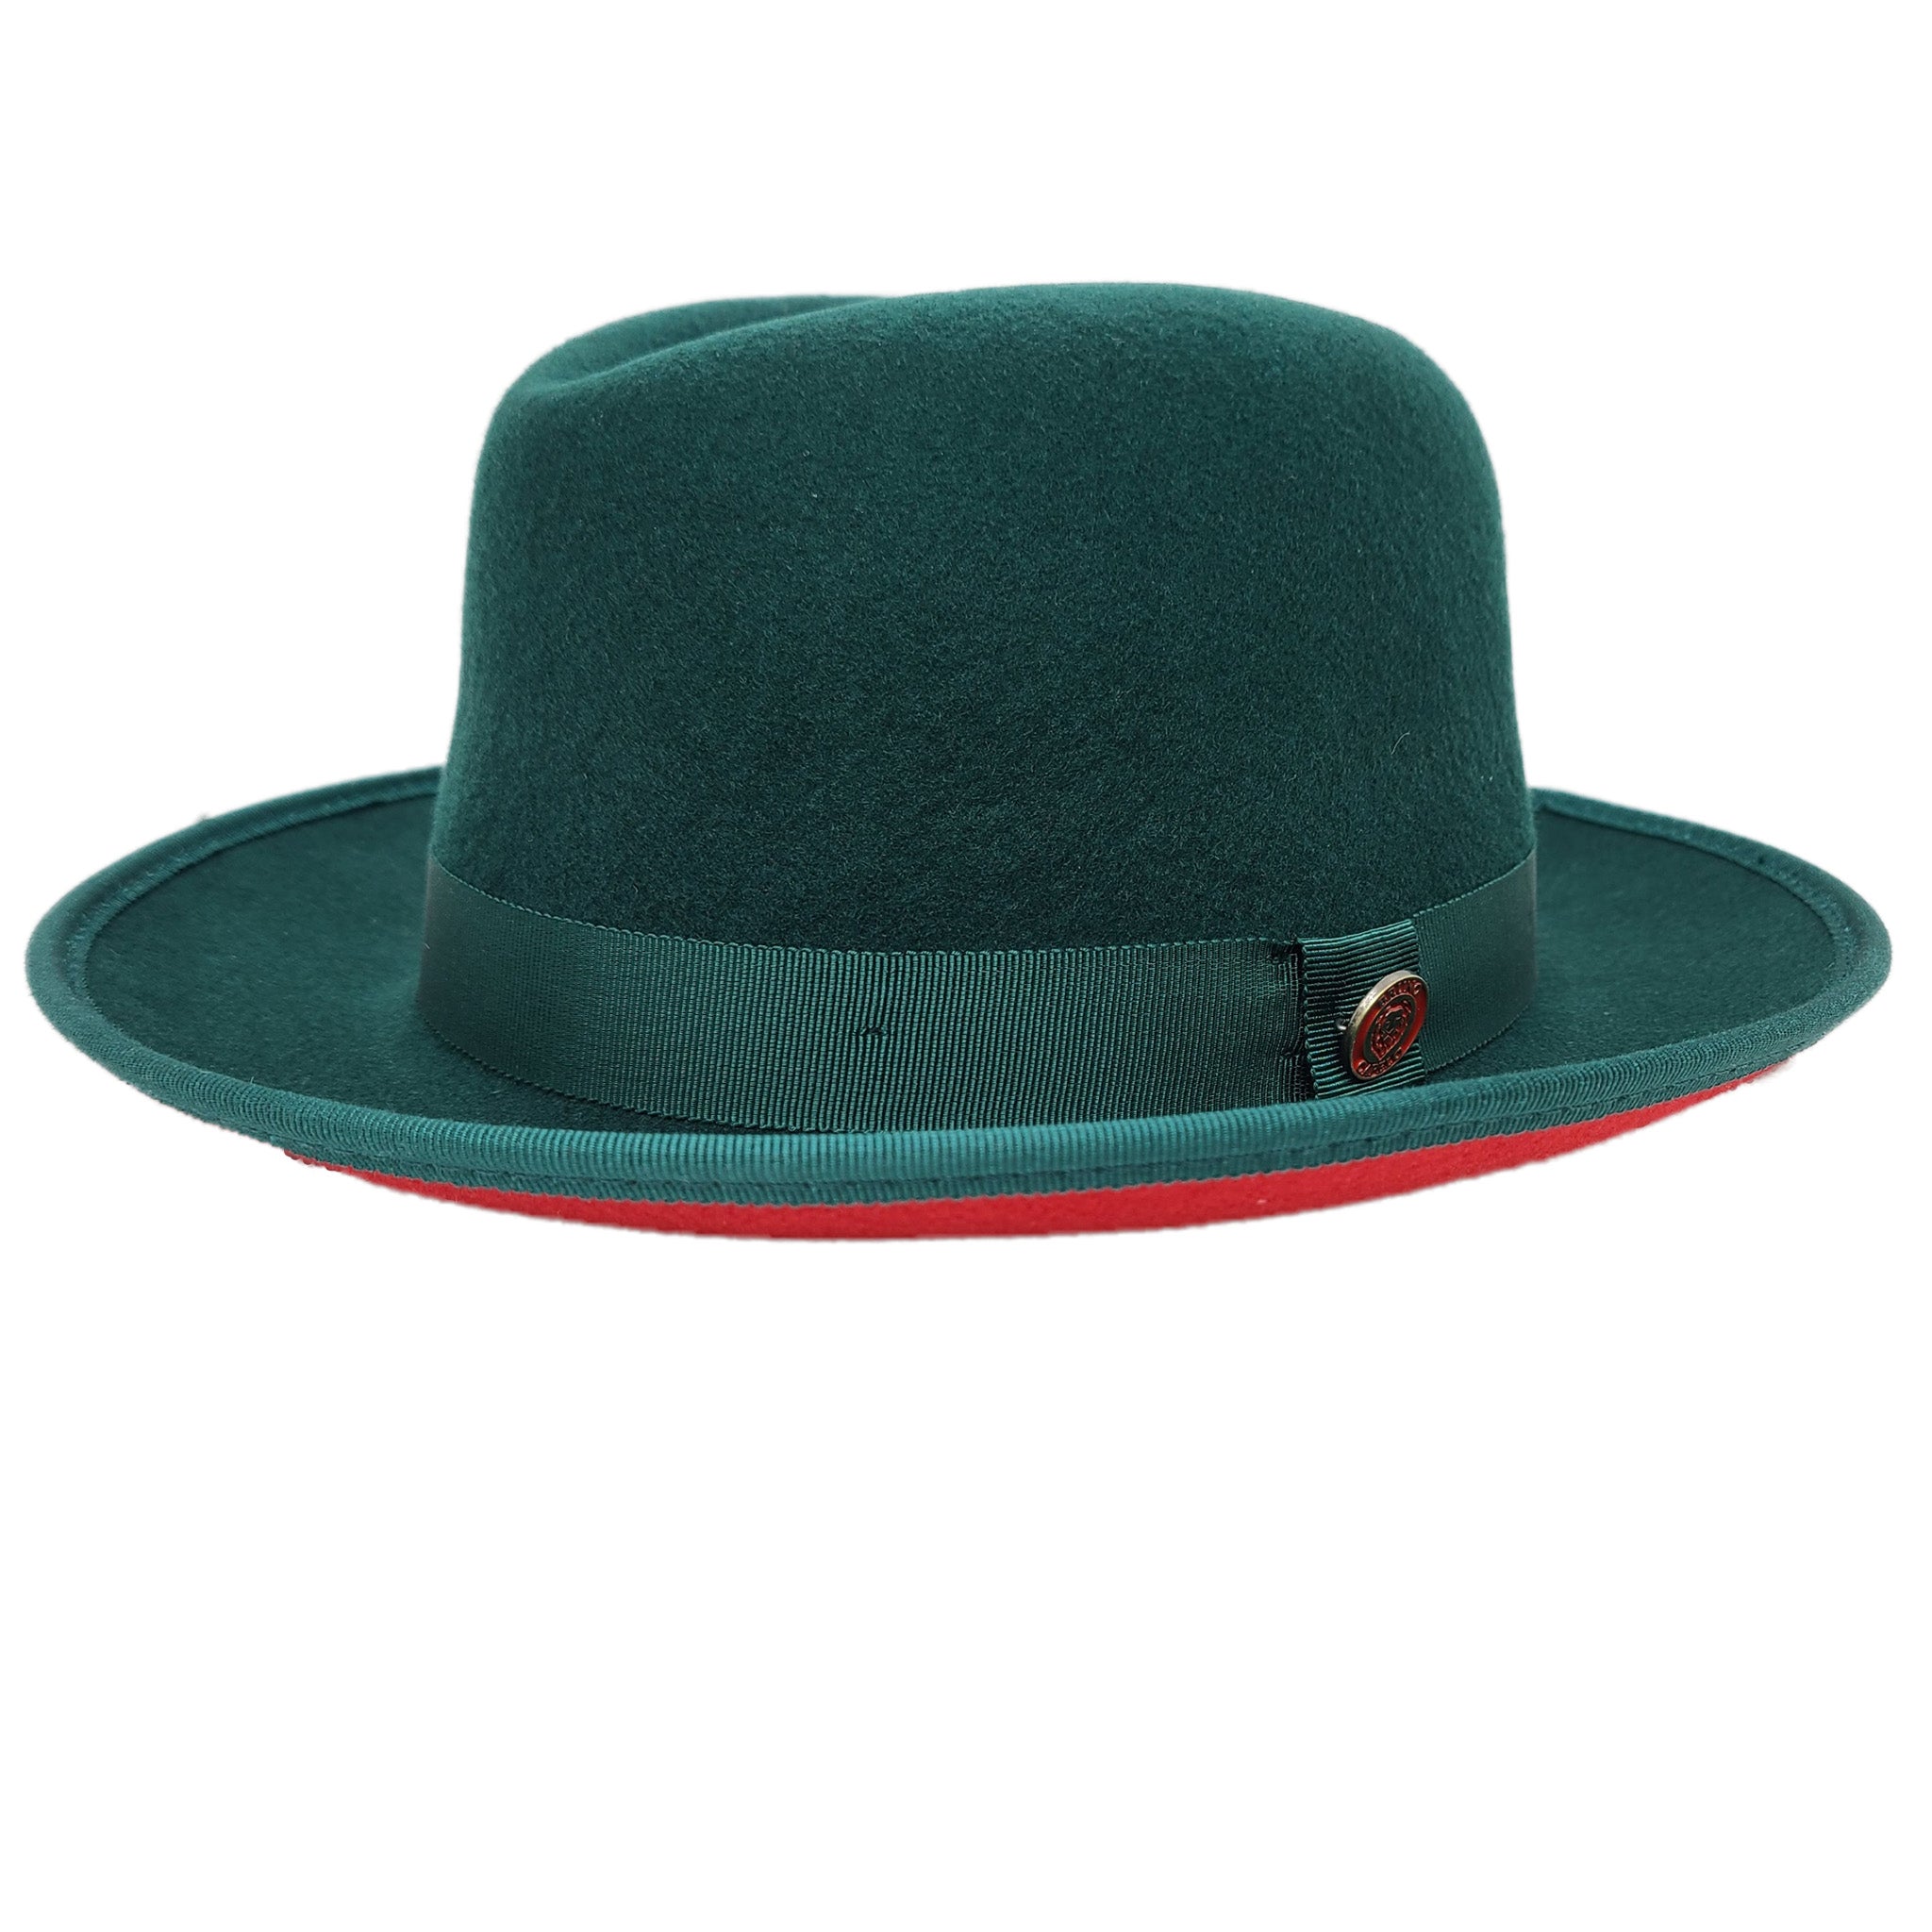 Green/Red Color Bottom Hat